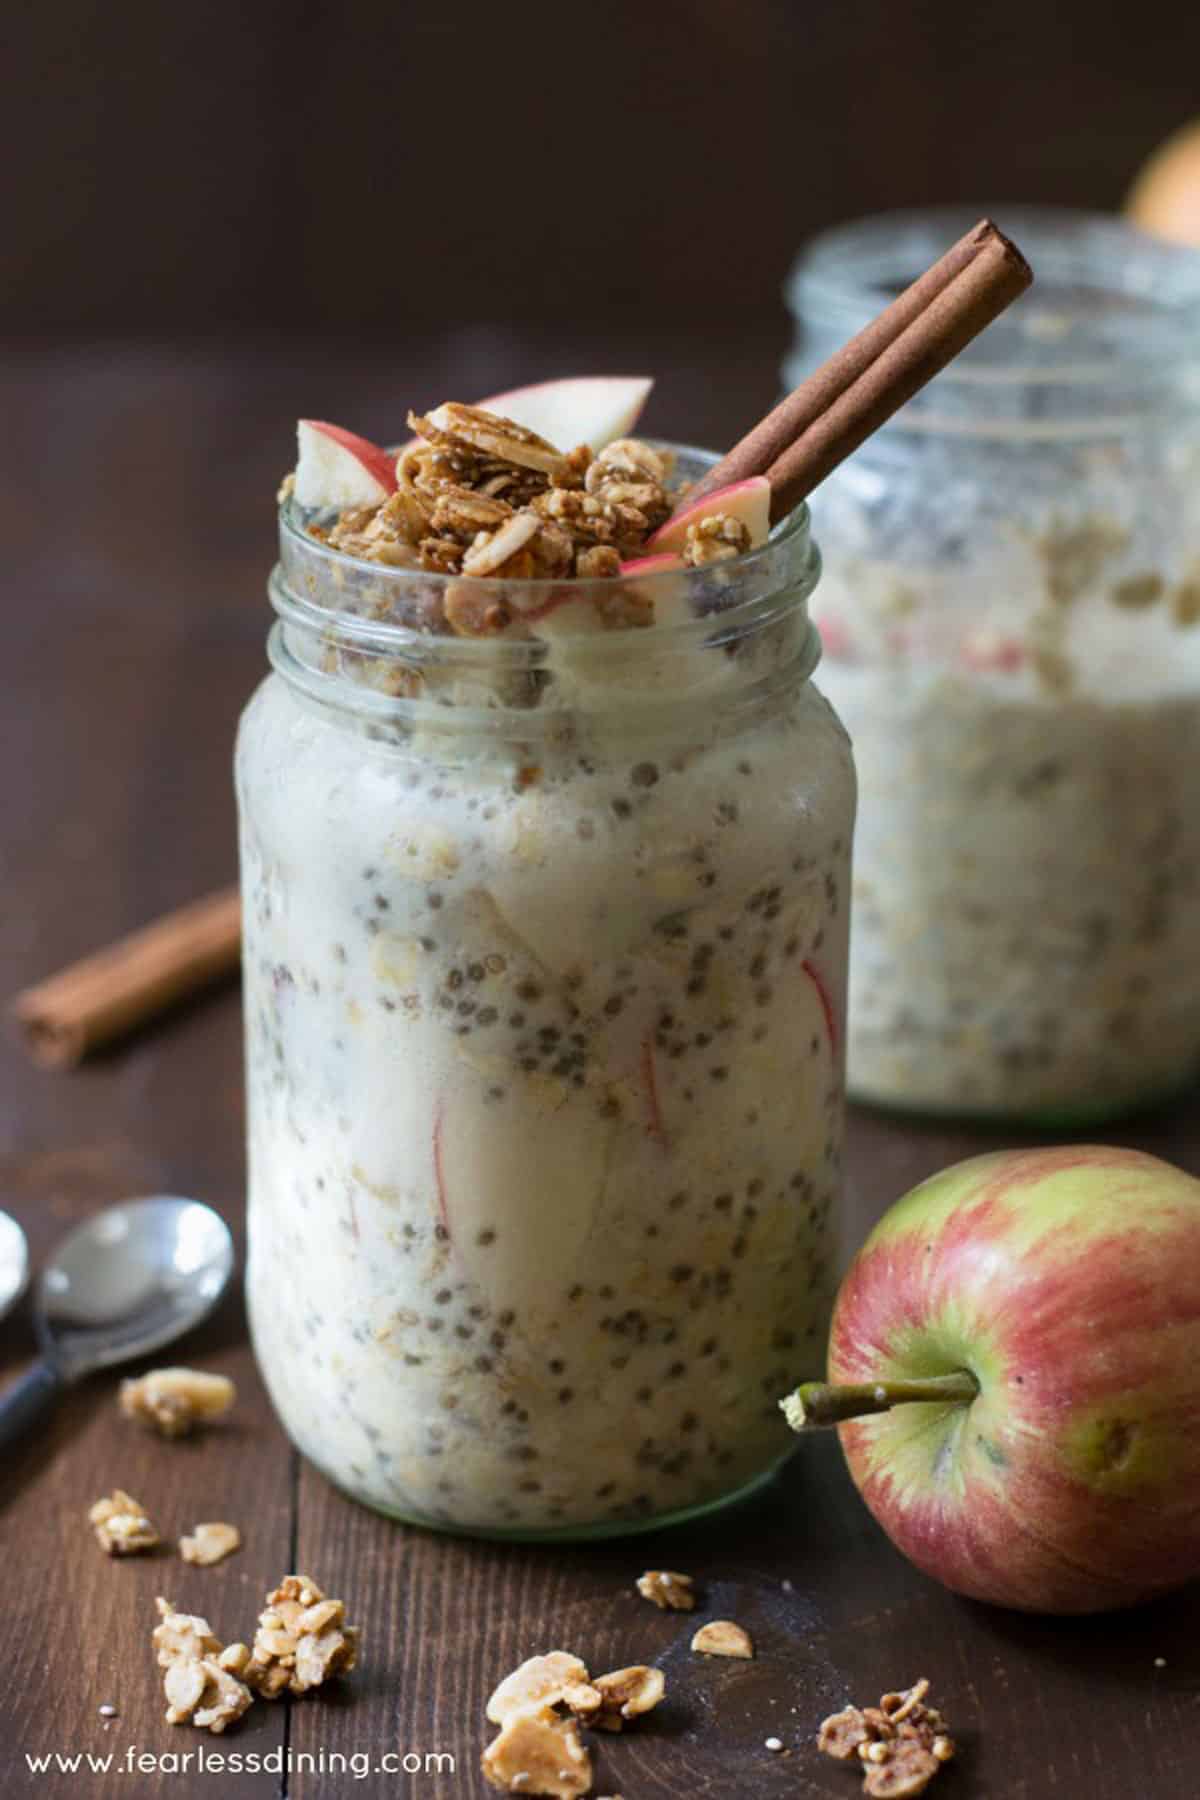 Gluten free overnight oats in two mason jars. The oats are topped with apple granola.